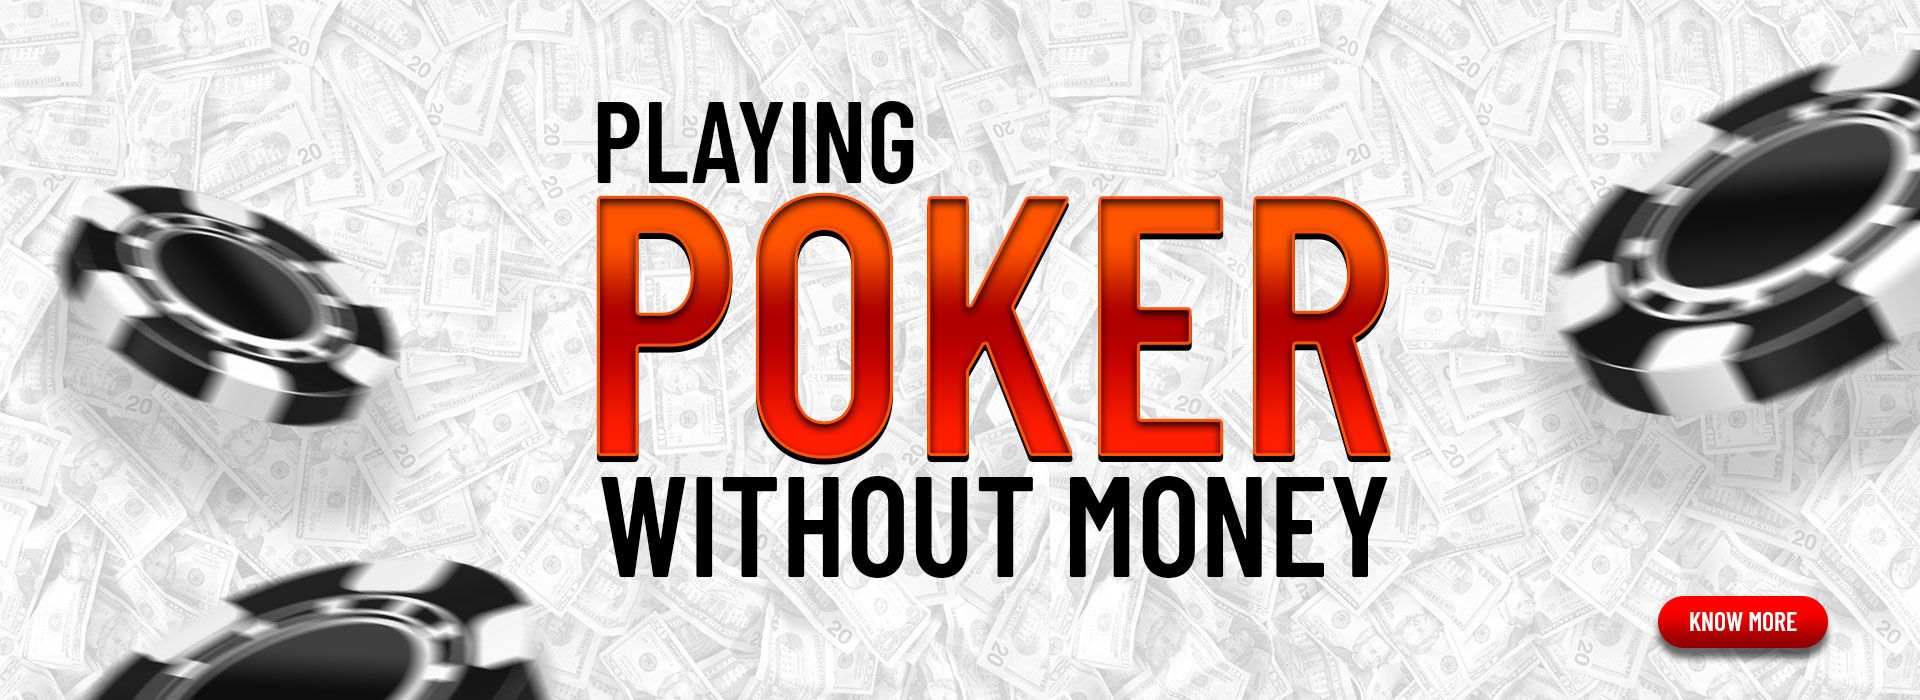 Play Poker Without Chips